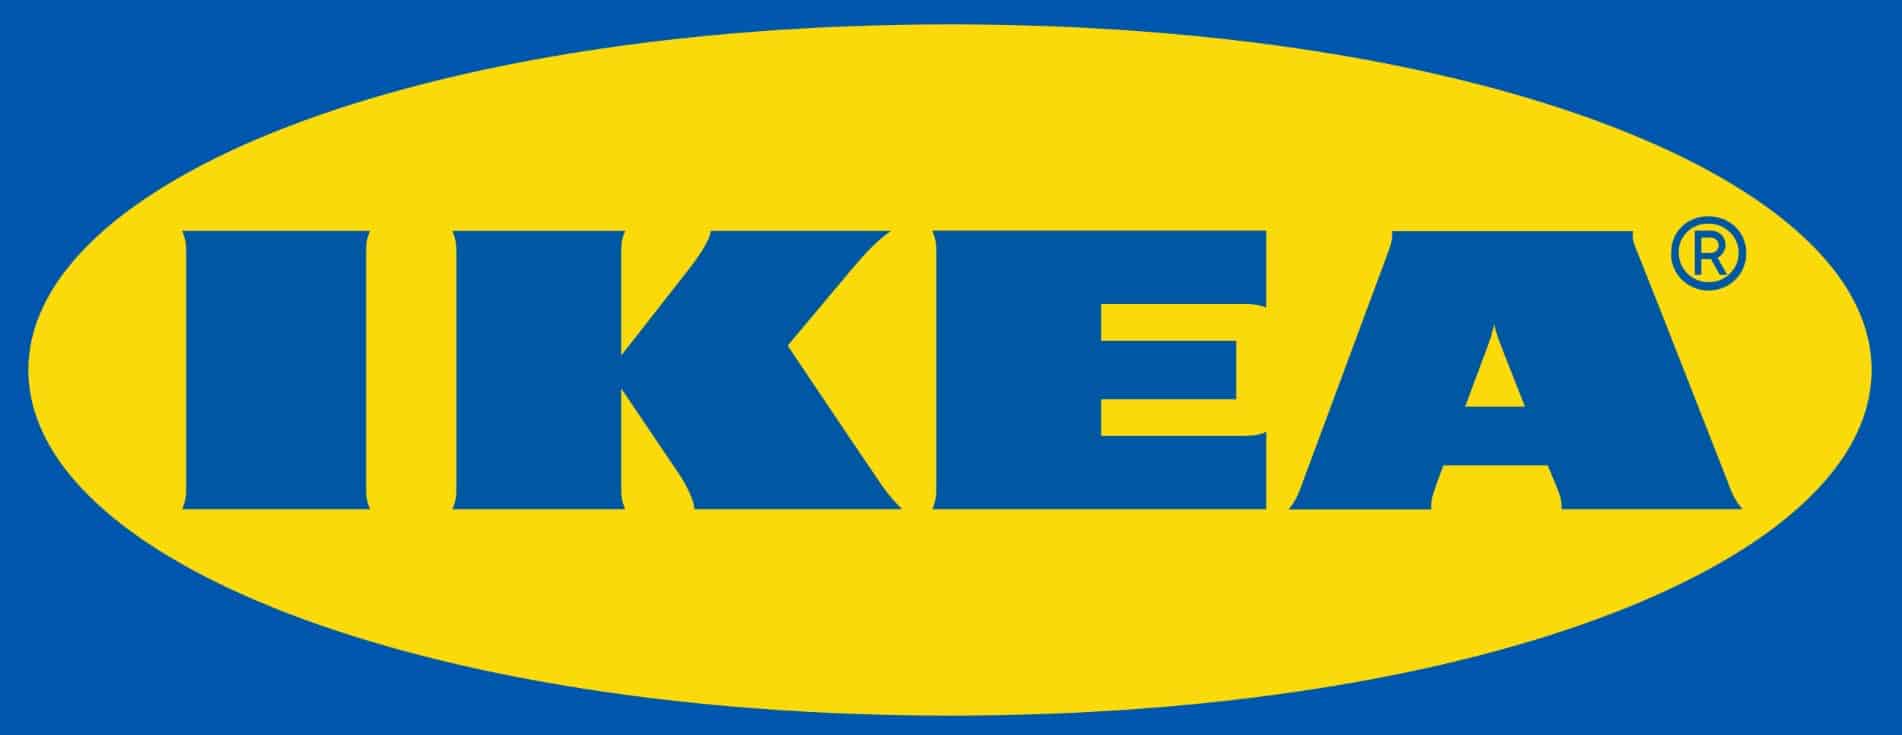 Members of the IKEA Family get a 5% Discount on all purchases